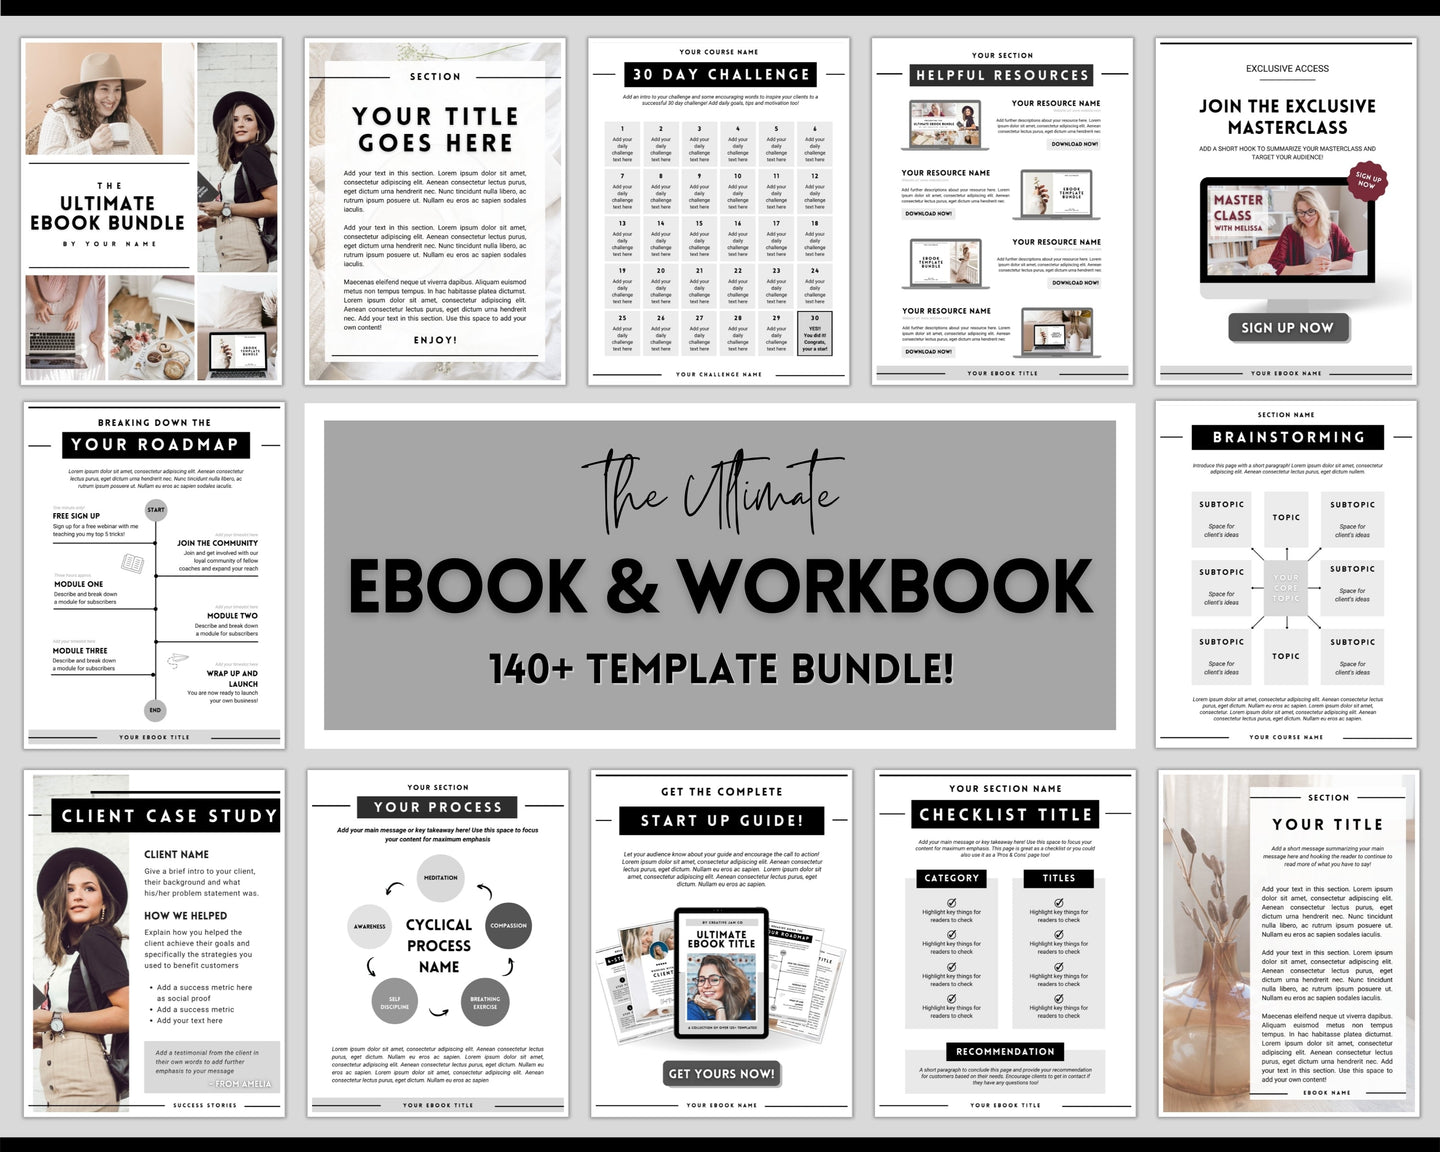 140+ eBook Template Canva, Workbook, Worksheets & Lead Magnet for Coaches, Bloggers. Opt In, Charts, Checklists, Planners, Webinar, Challenges | Lovelo Mono